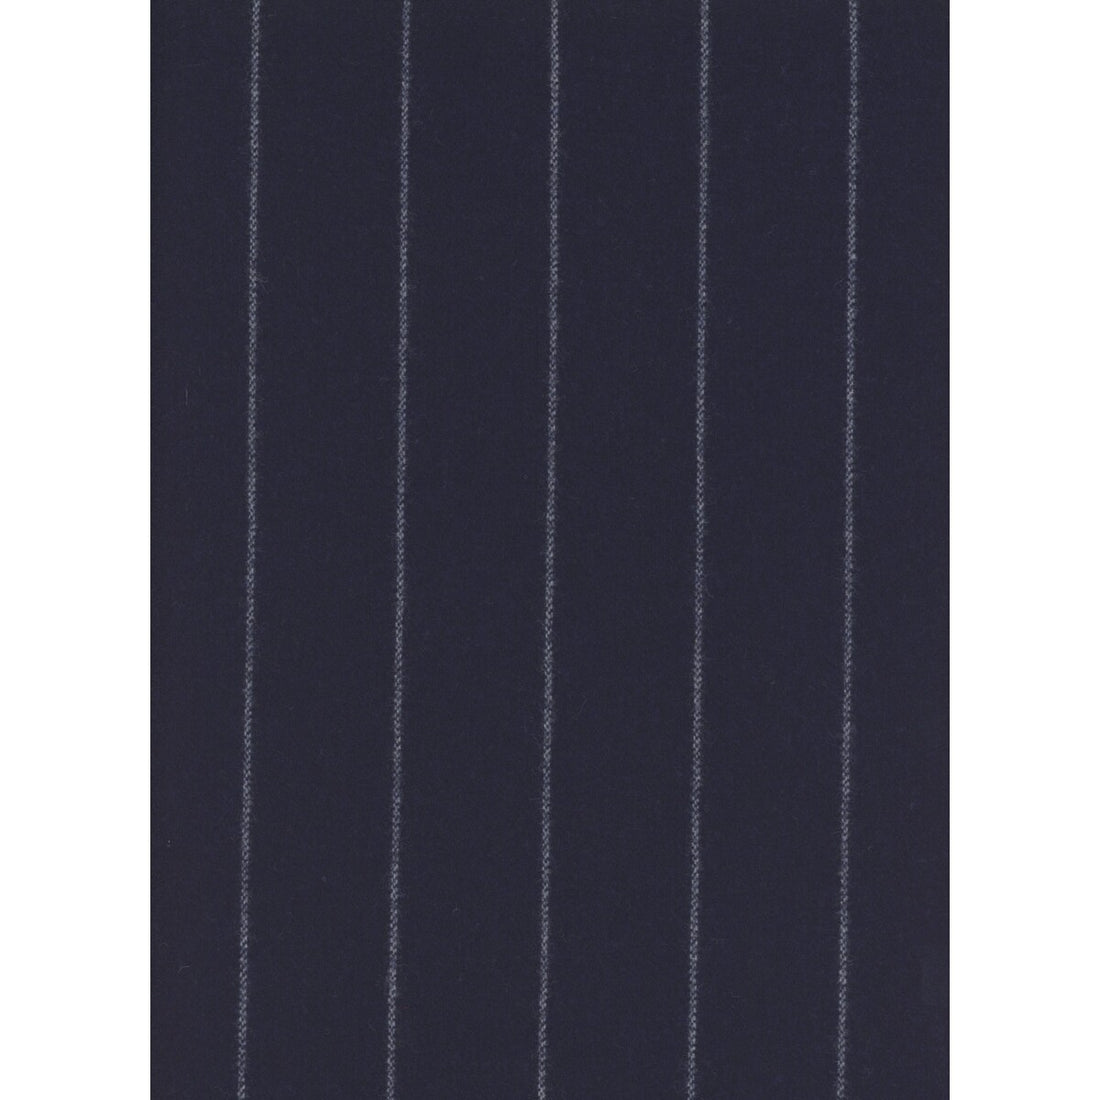 Cambridge fabric in navy color - pattern AM100311.50.0 - by Kravet Couture in the Andrew Martin Windsor collection